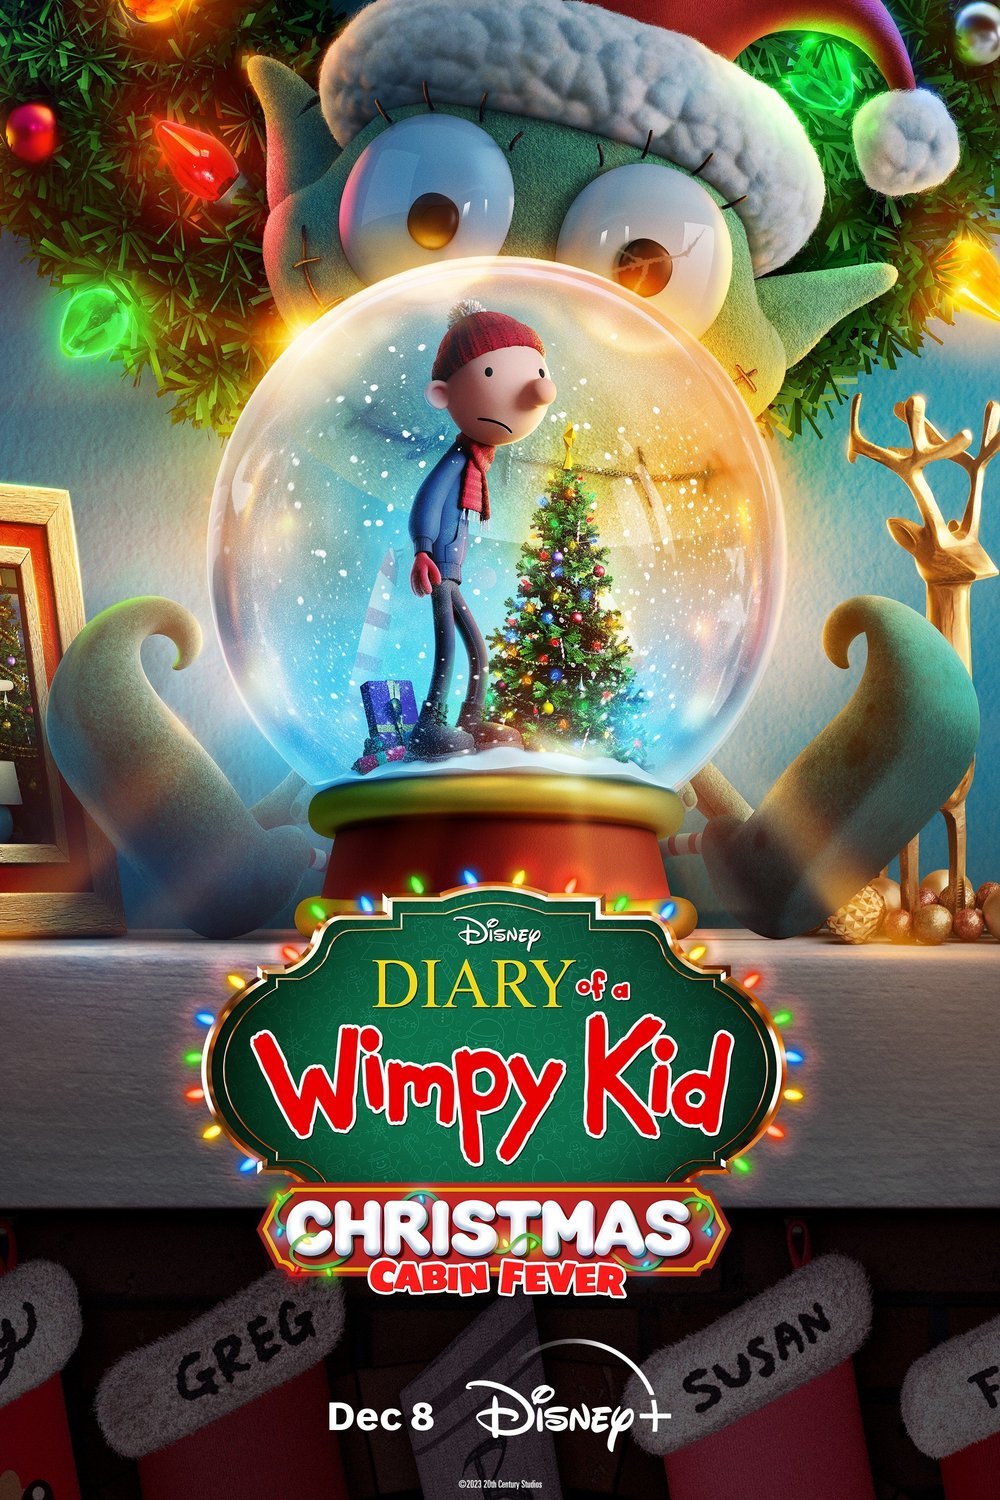 L'affiche du film Diary of a Wimpy Kid Christmas: Cabin Fever